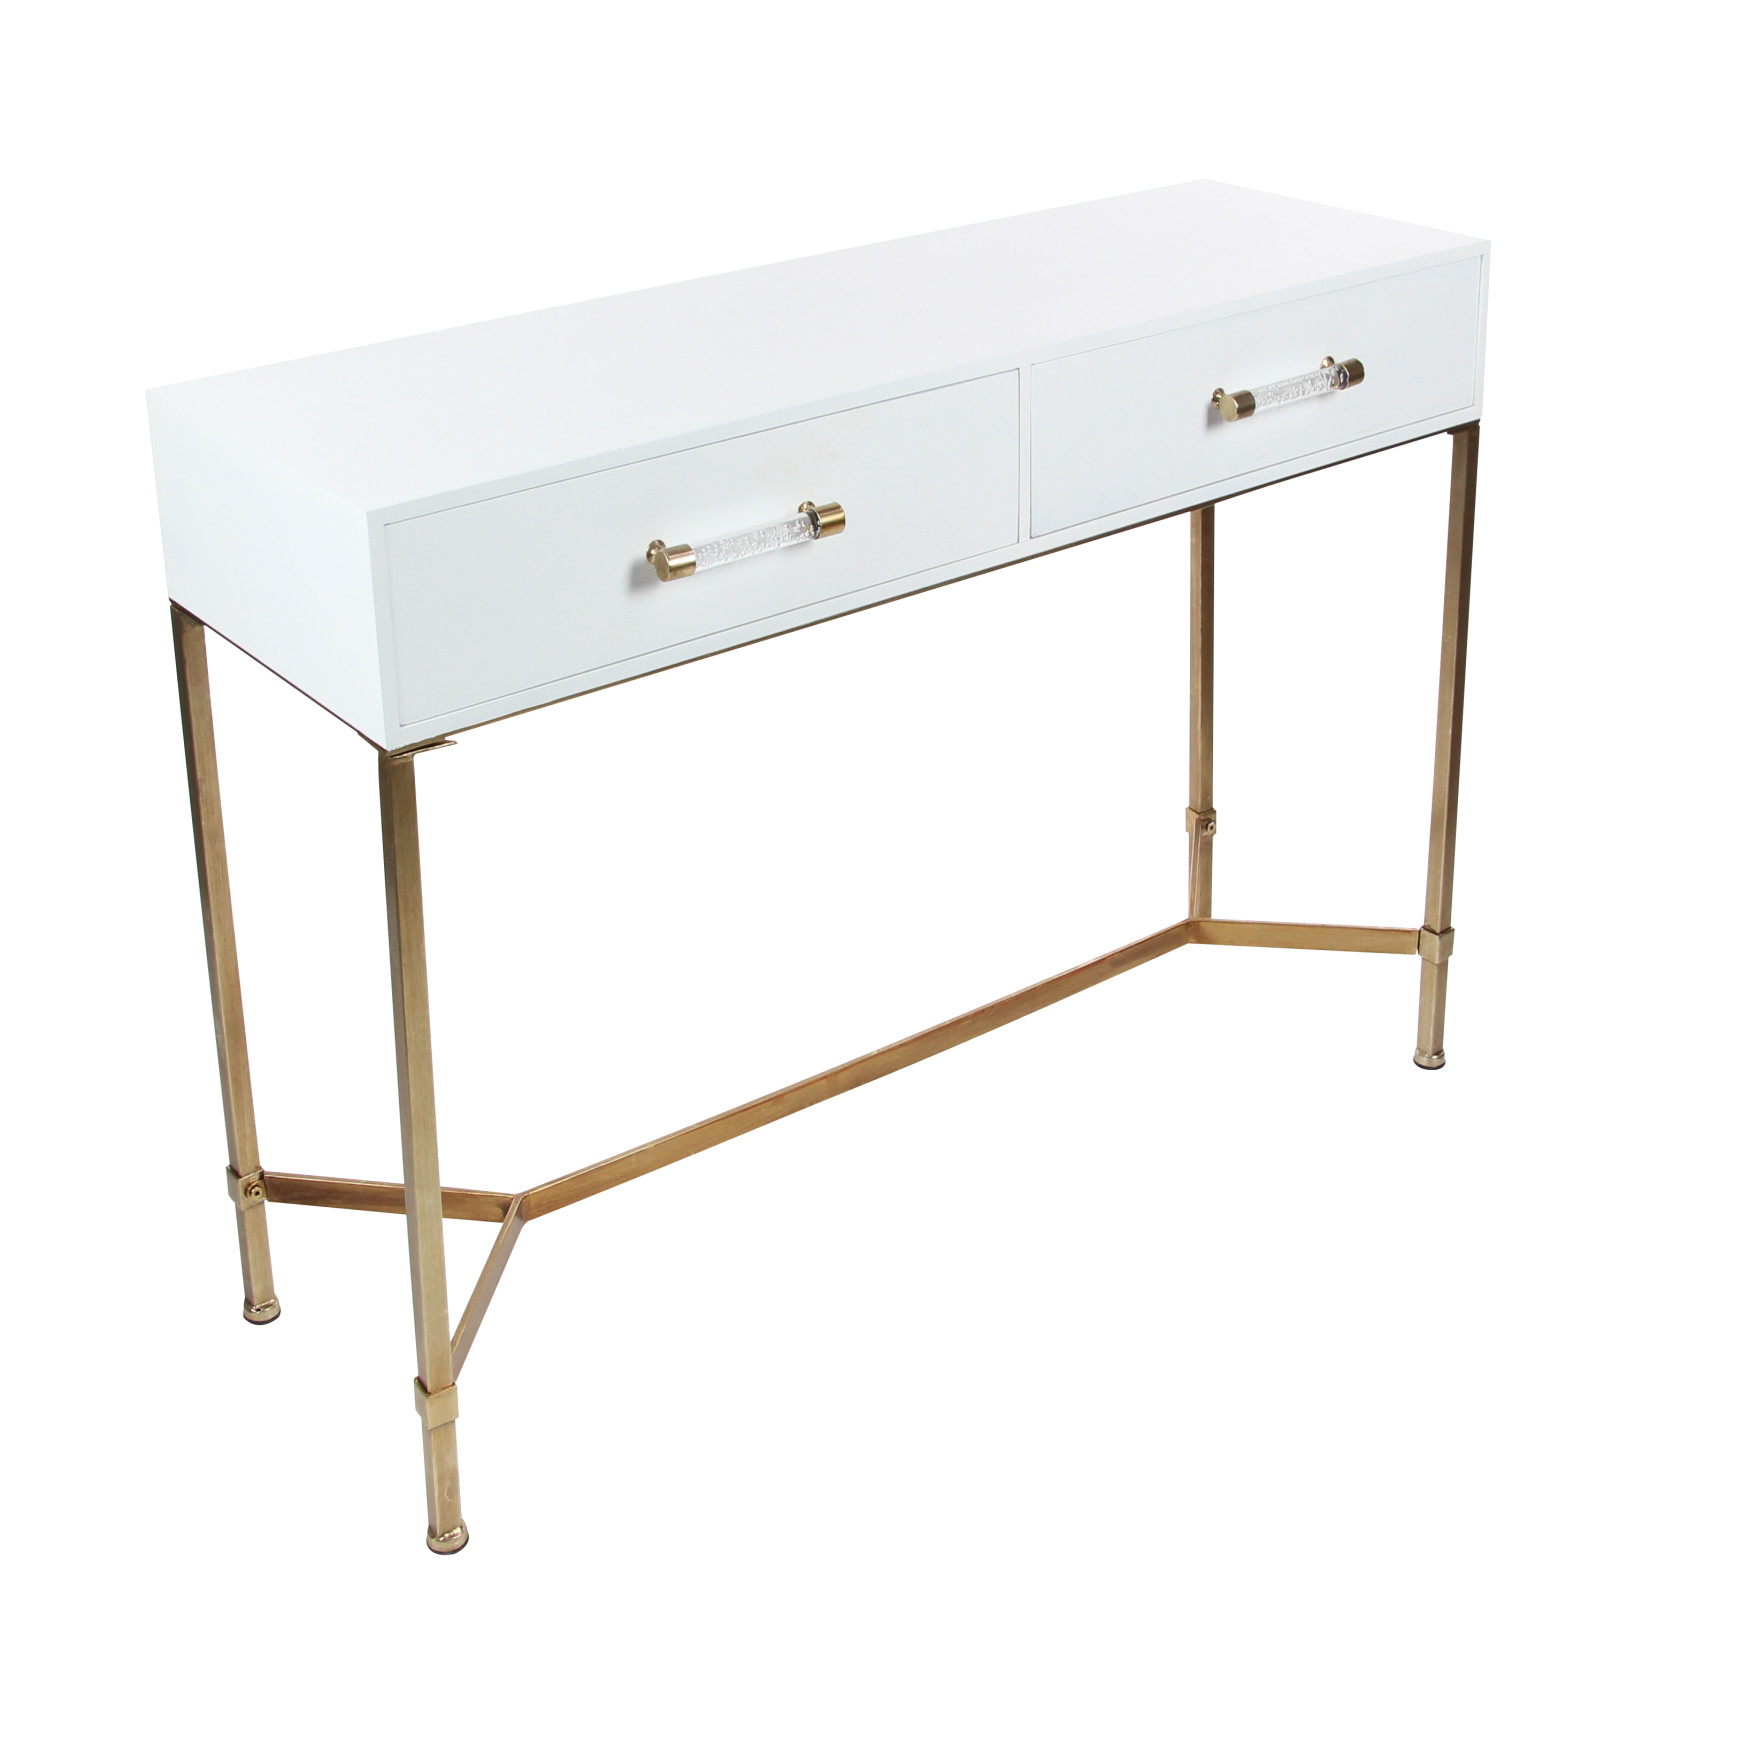 White Glam Metal Console Table, 31 x 47, WHITE